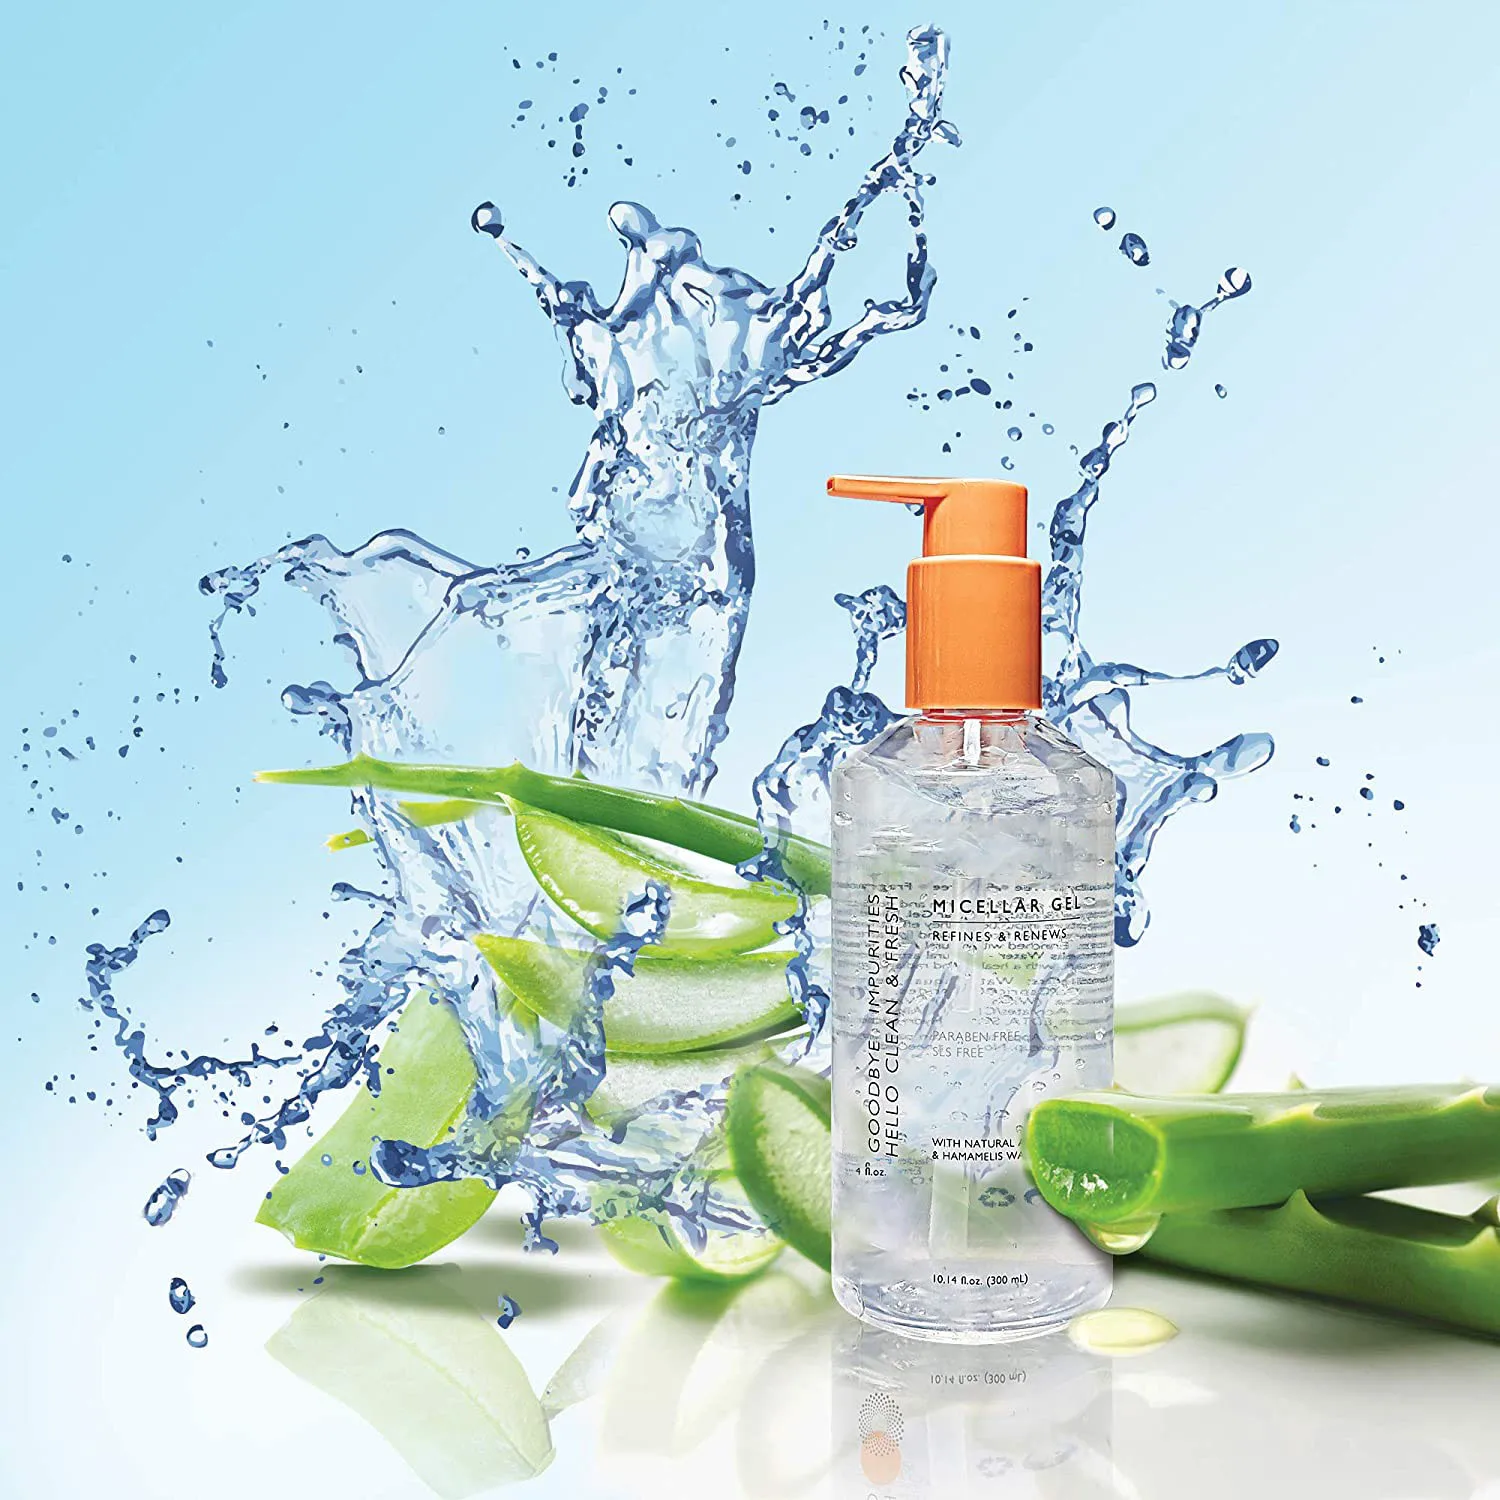 

New Style Aloe Whitening And Replenishing Water Cleanser Mild Exfoliating Facial Cleansing Gel Men Facial Cleanser